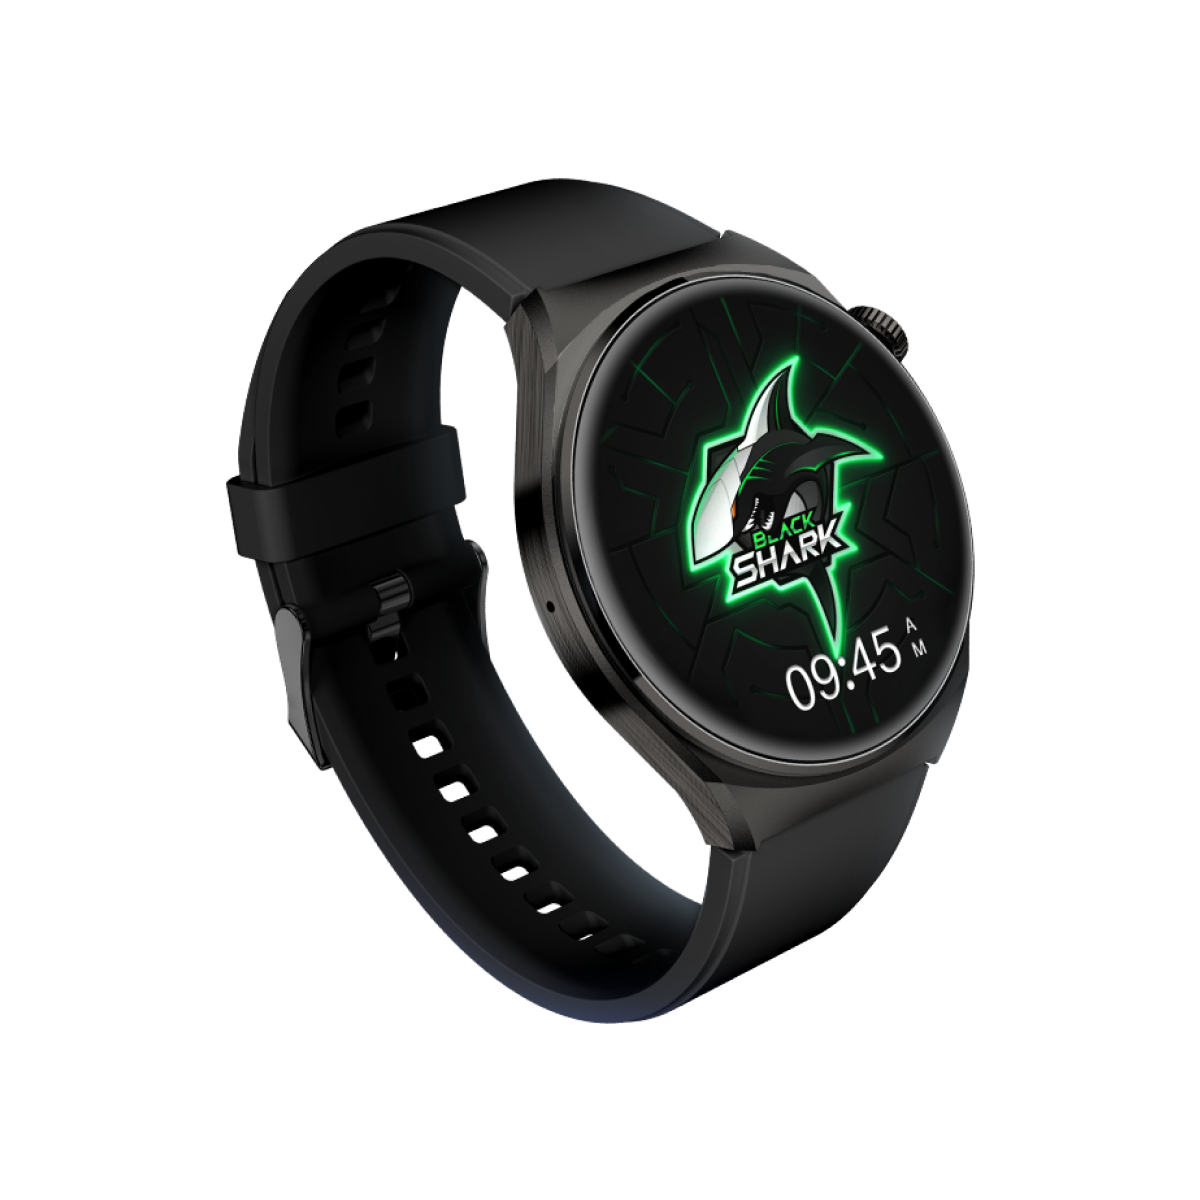 Black Shark launches new smartwatch lineup in Malaysia, starting at RM99 -  SoyaCincau